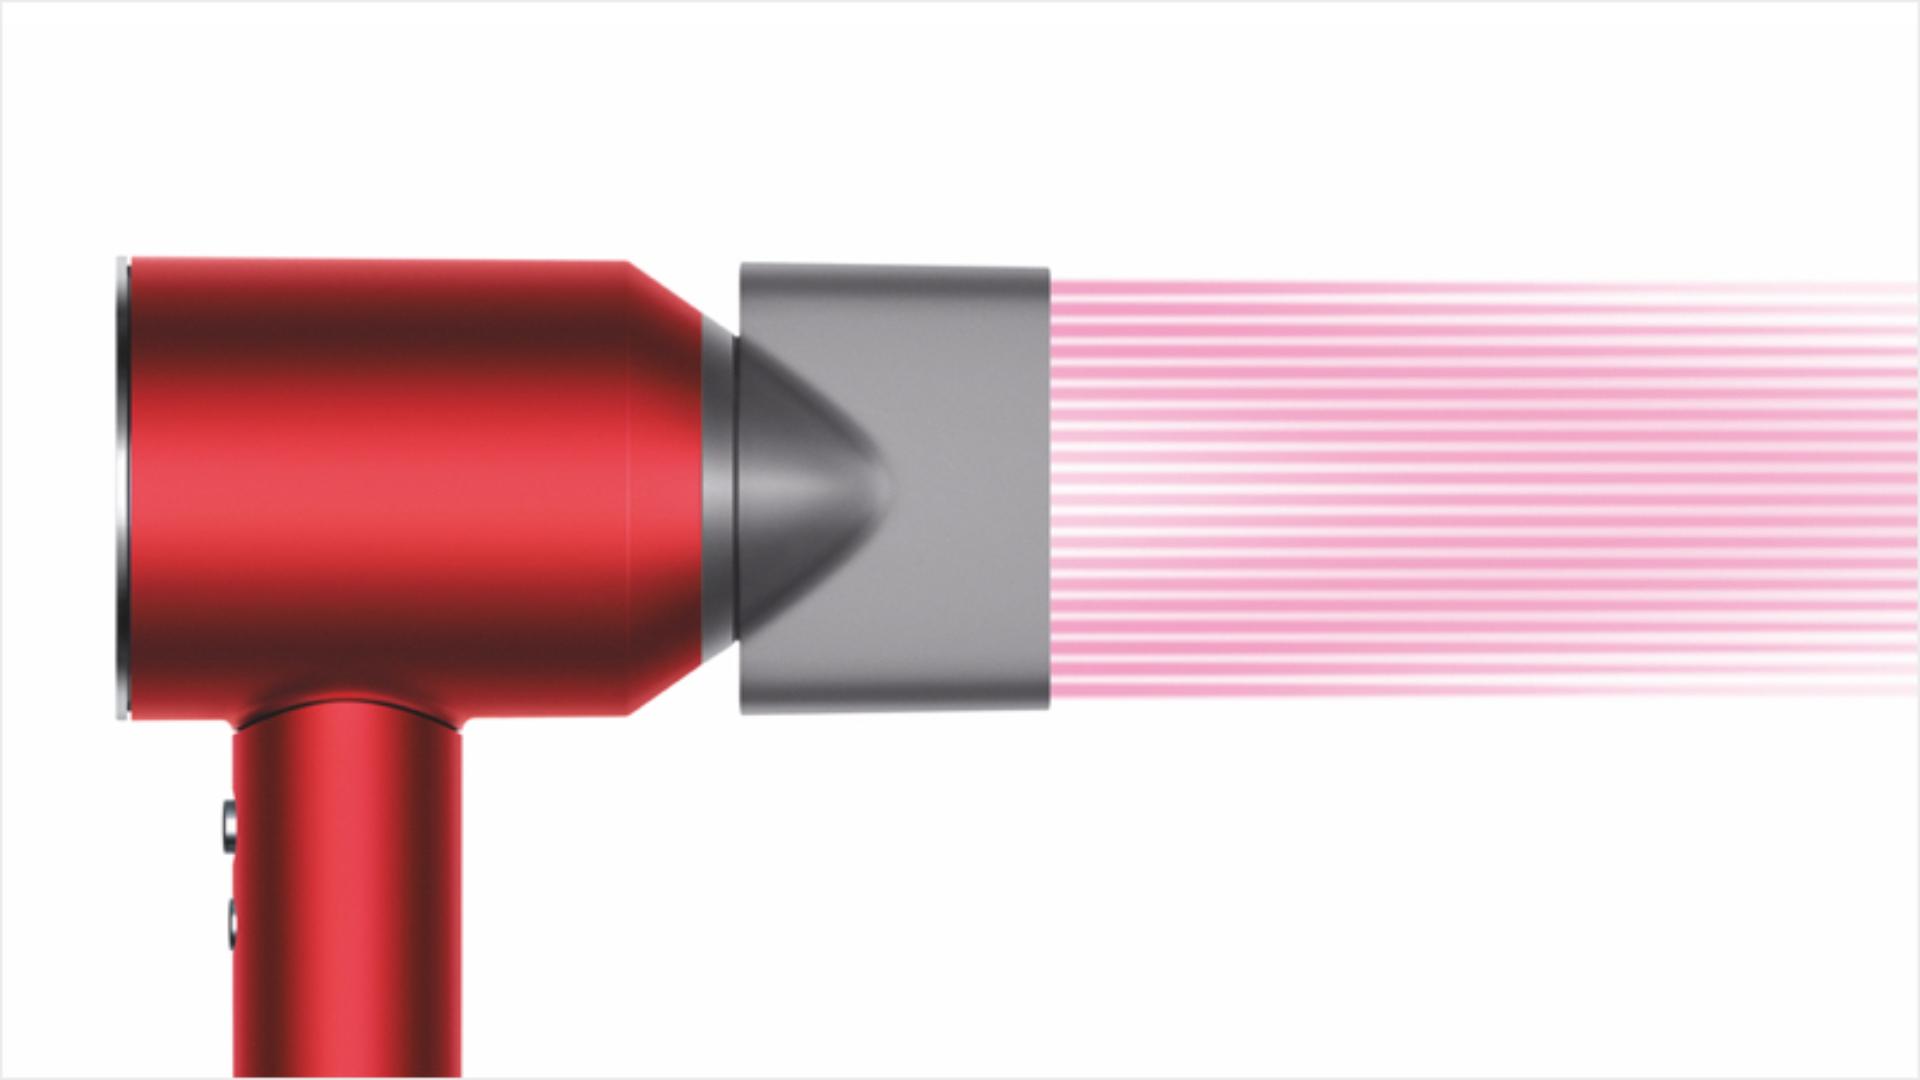 Dyson Supersonic™ hair dryer with re-engineered Styling concentrator attached